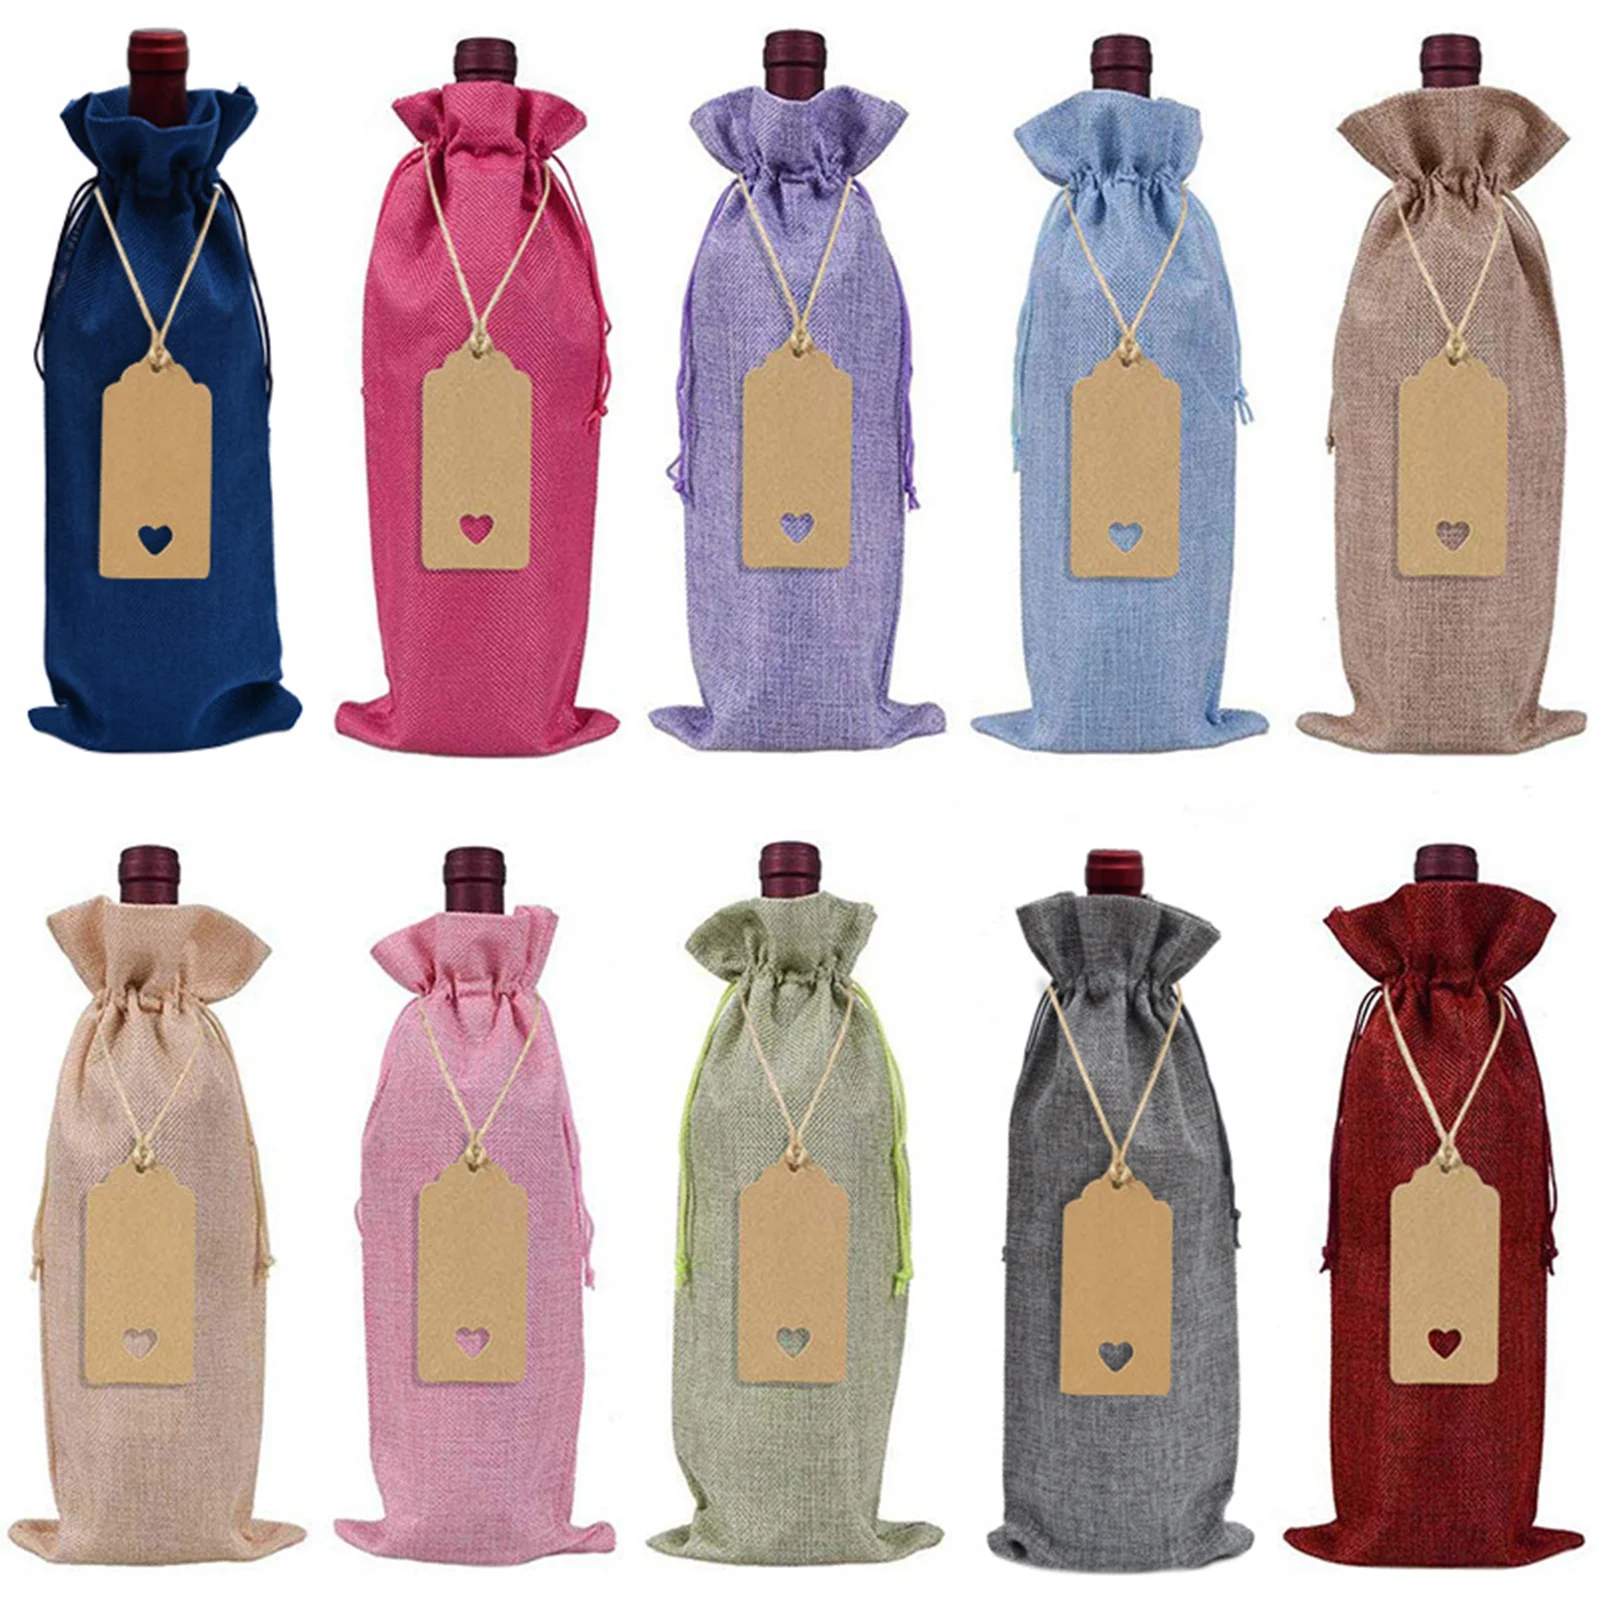 Home Storage 12 Pcs Wine Bottle Bags with Drawstring Birthday Housewarming Tag & Rope Burlap Wine Bags Wine Gift Bags Holiday Party Valentine Wedding Reusable Wine Bottle Covers for Christmas 